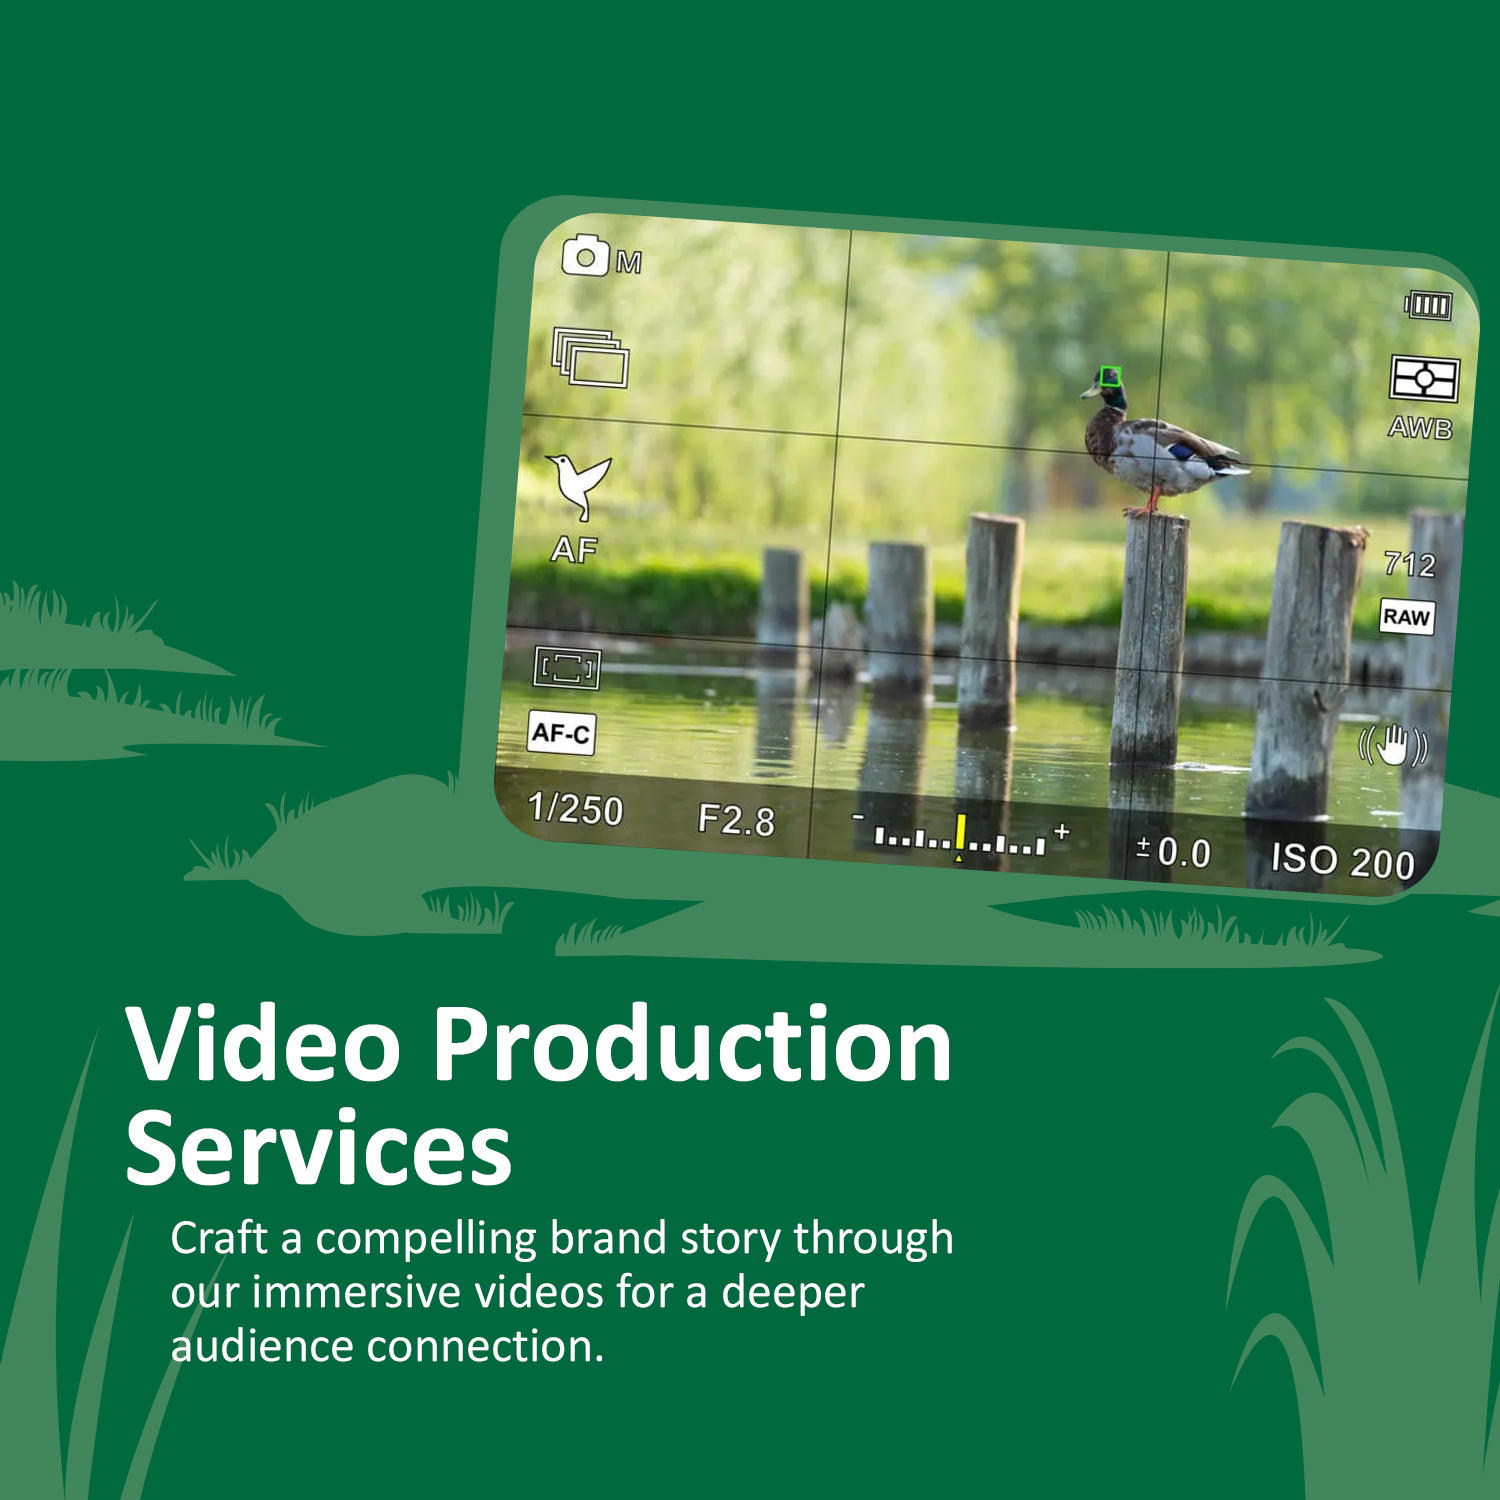 Nothing can spread a message faster than quality video production. Keep your audience engaged with our video services. Learn More: https://paraduxmedia.com